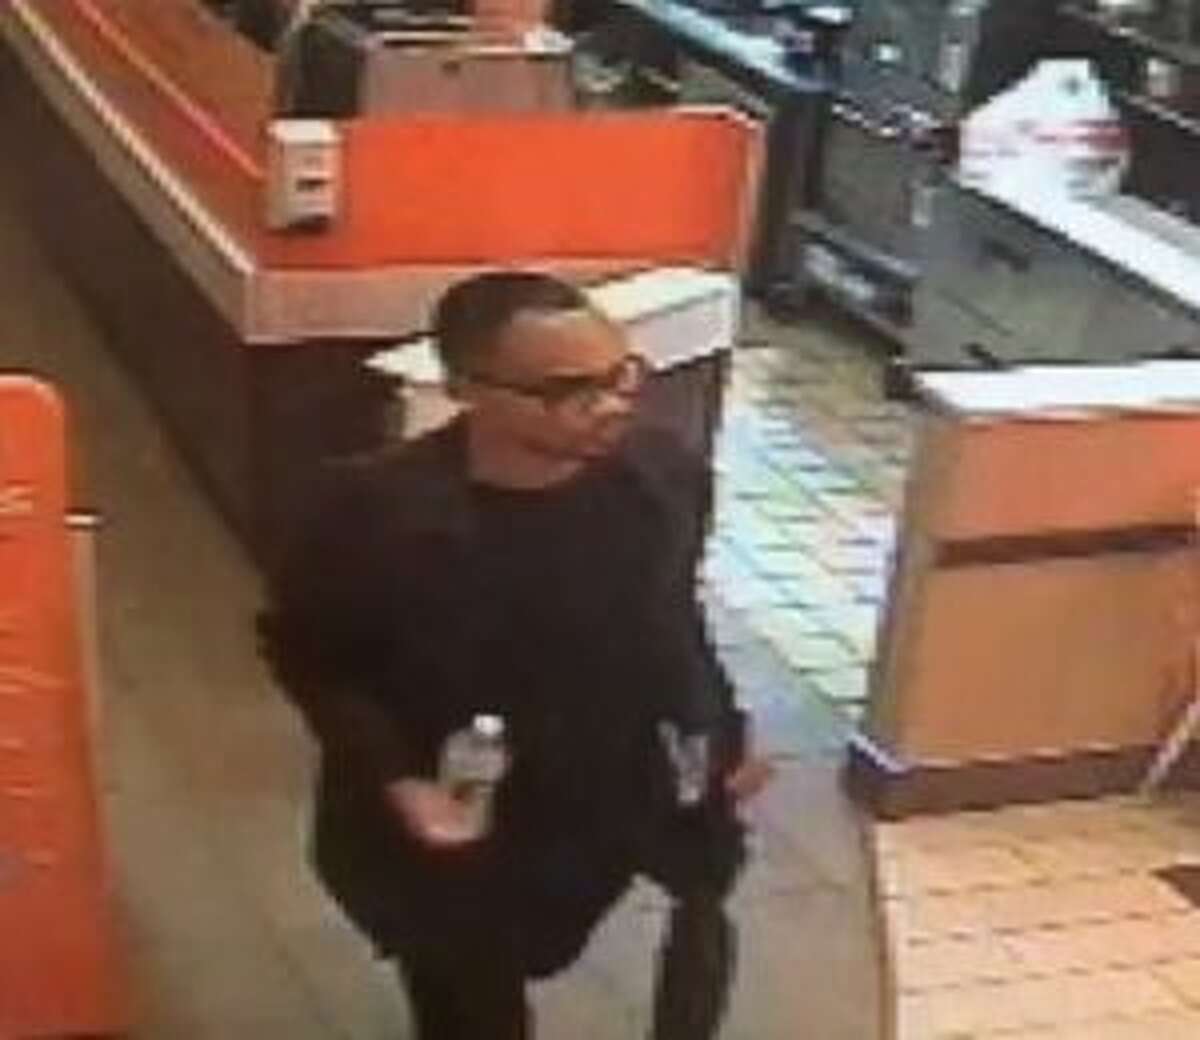 New Canaan Police suspect this man of asking two girls to join him in the bathroom at Dunkin' at 7:15 p.m. Thursday, March 21, and ask anyone who recognizes him to all them at 203-594-3500.